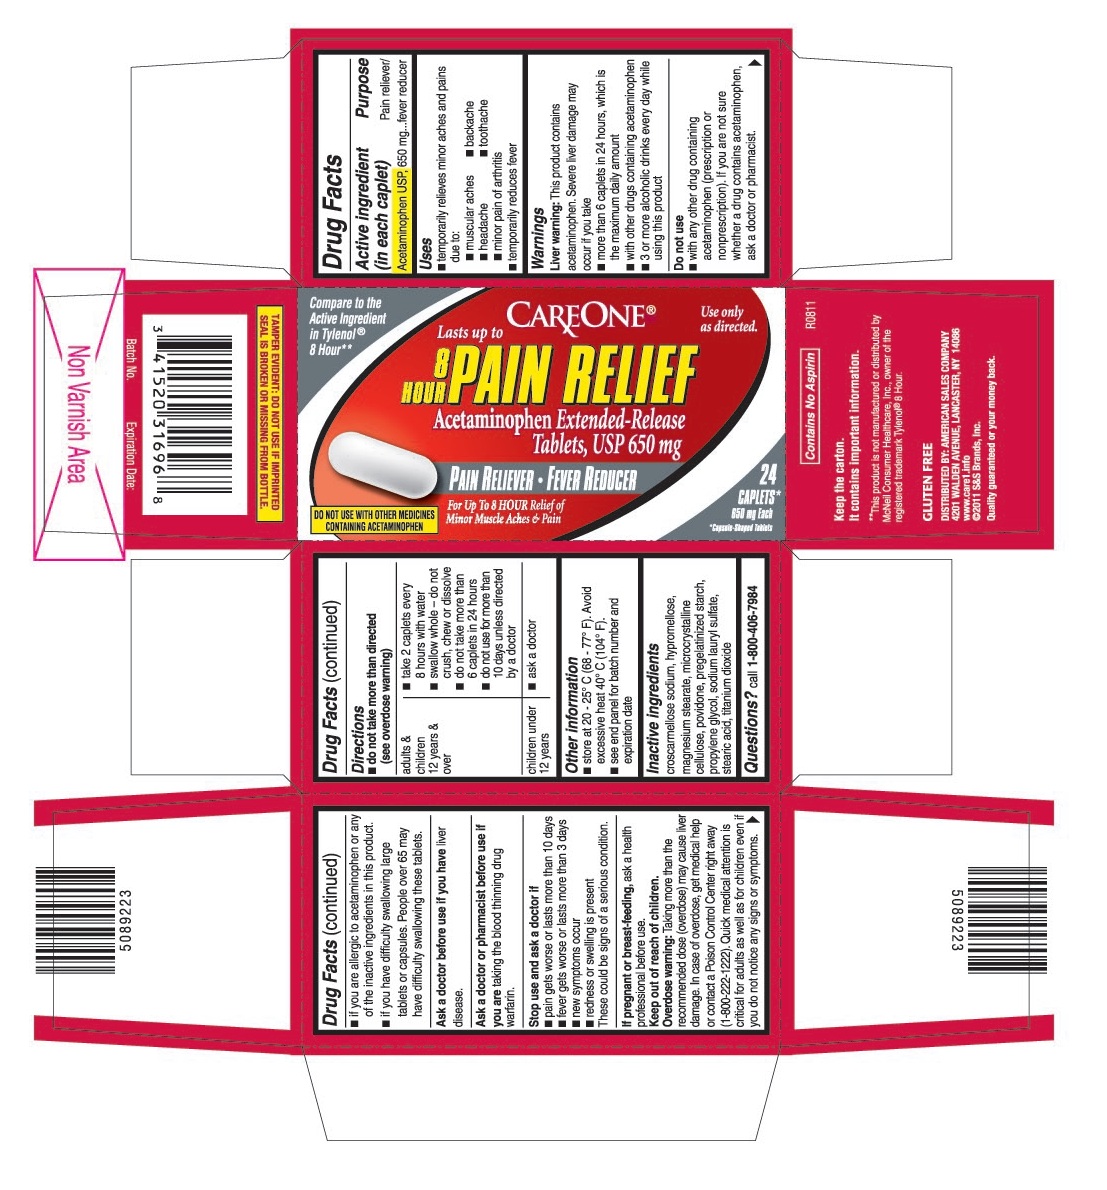 This is the 24 count blister carton label for Careone Acetaminophen extended-release tablets, USP 650 mg (8 Hour).